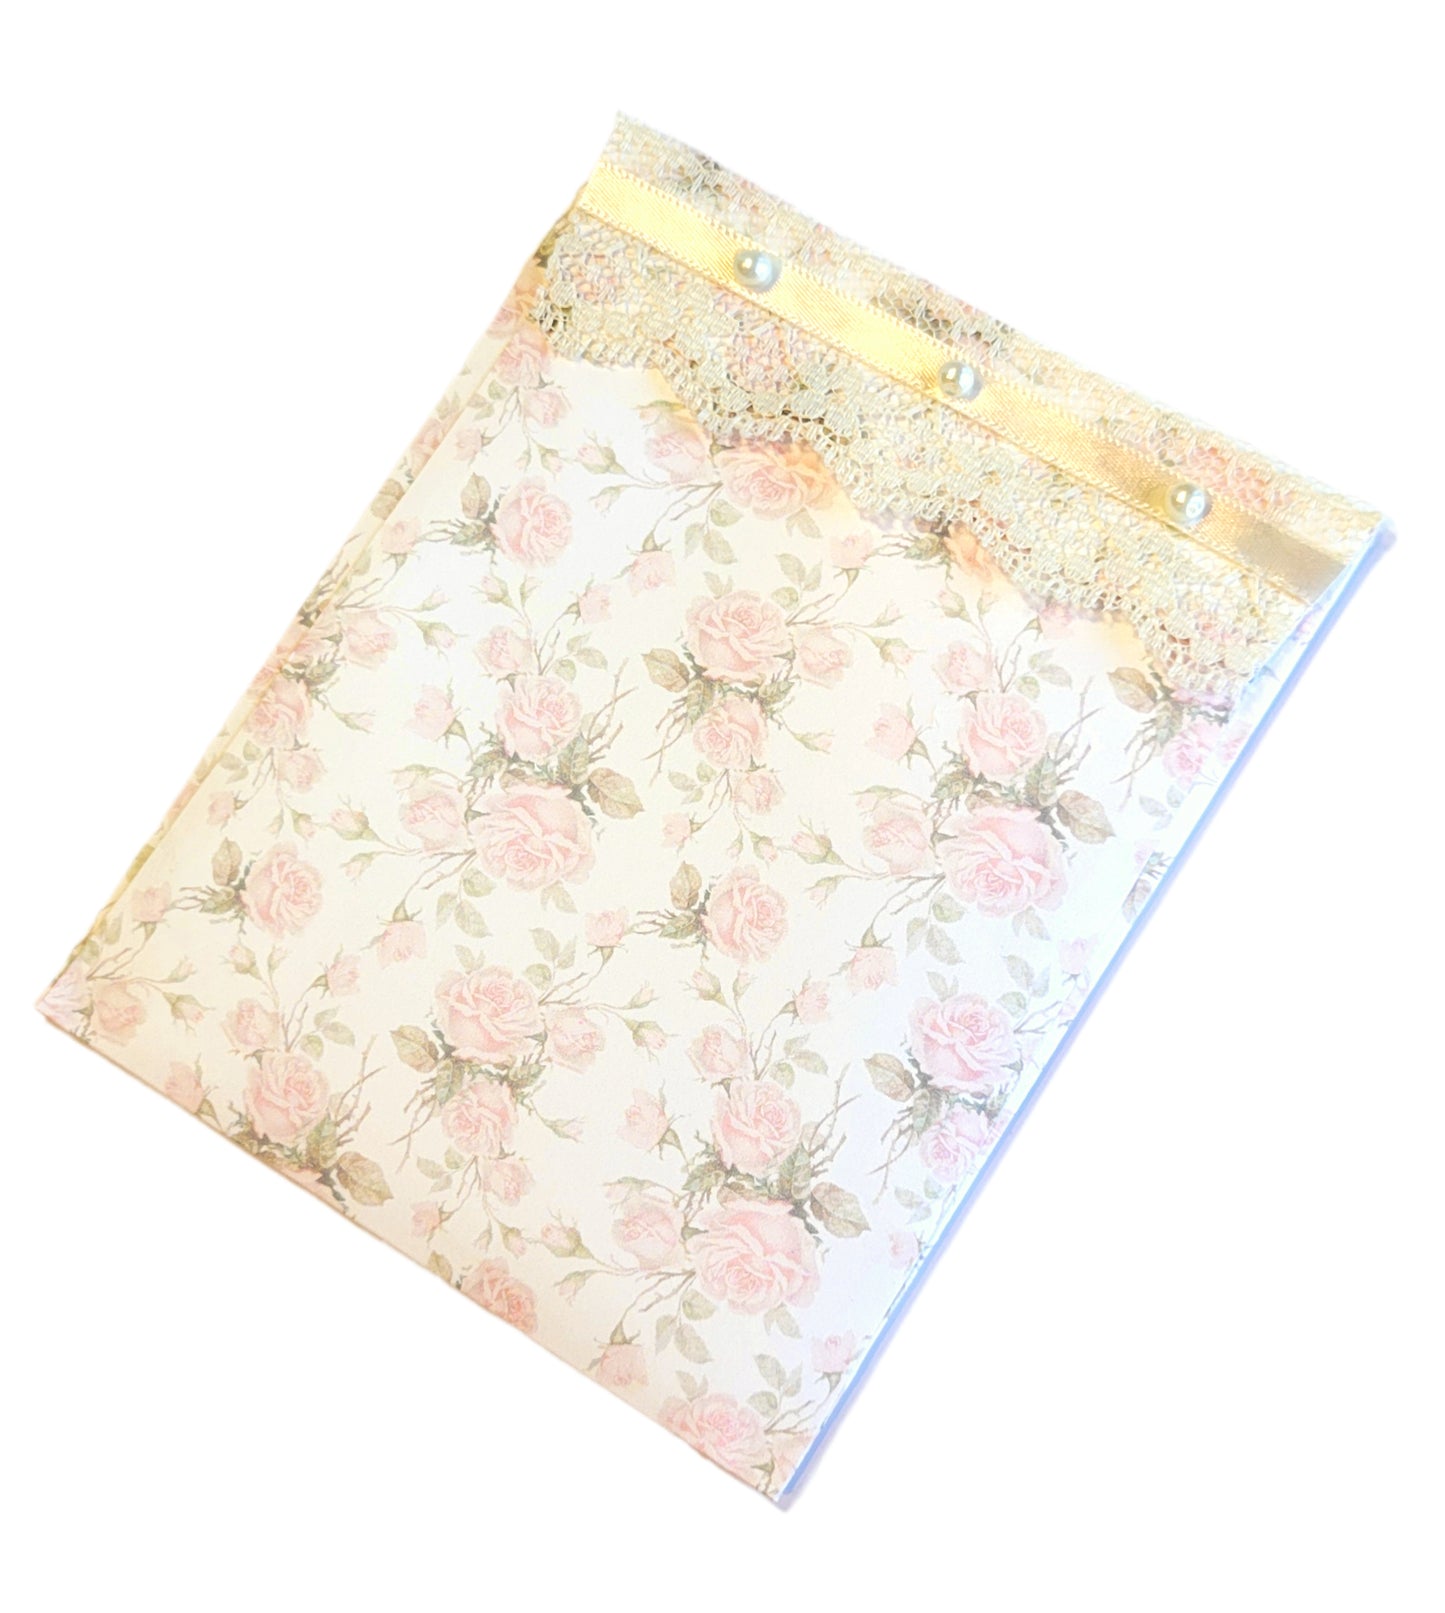 Pearls & Lace Rose Petal Scented Drawer, Closet & Car Sachets, Large Size 4" x 5", 3-Pack